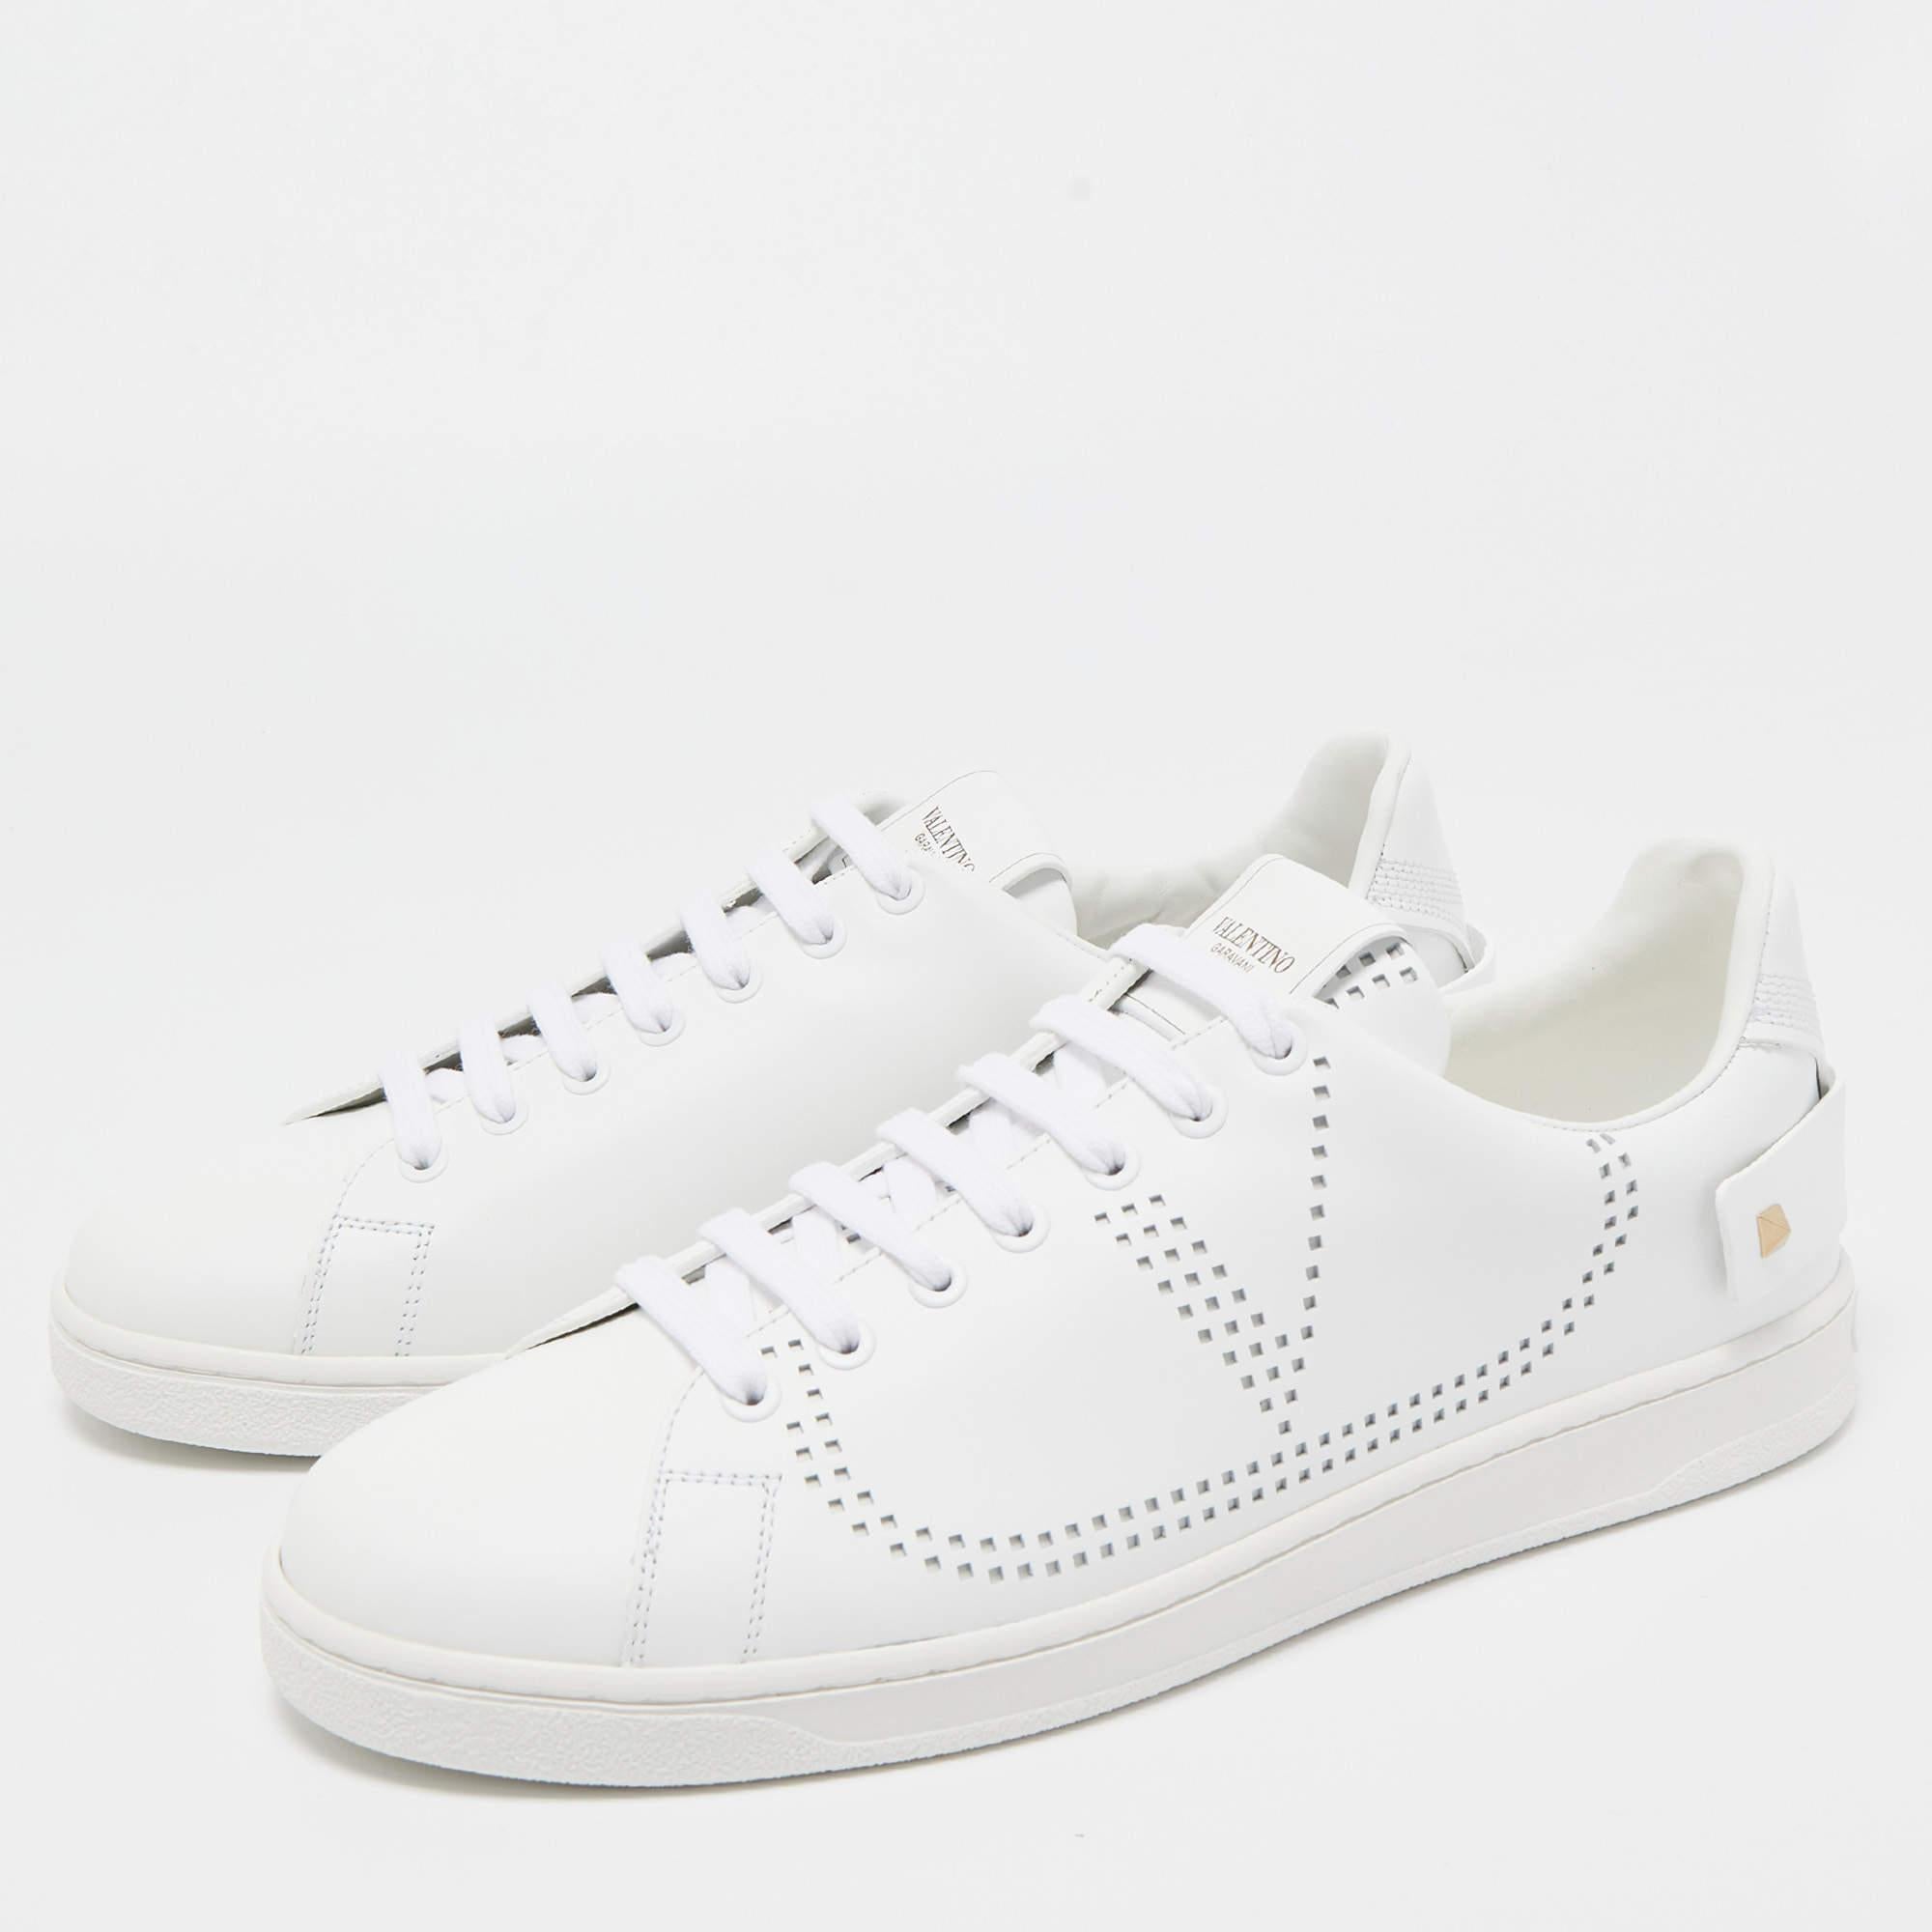 Give your outfit a luxe update with this pair of white Valentino sneakers. The shoes are sewn perfectly to help you make a statement in them for a long time.

